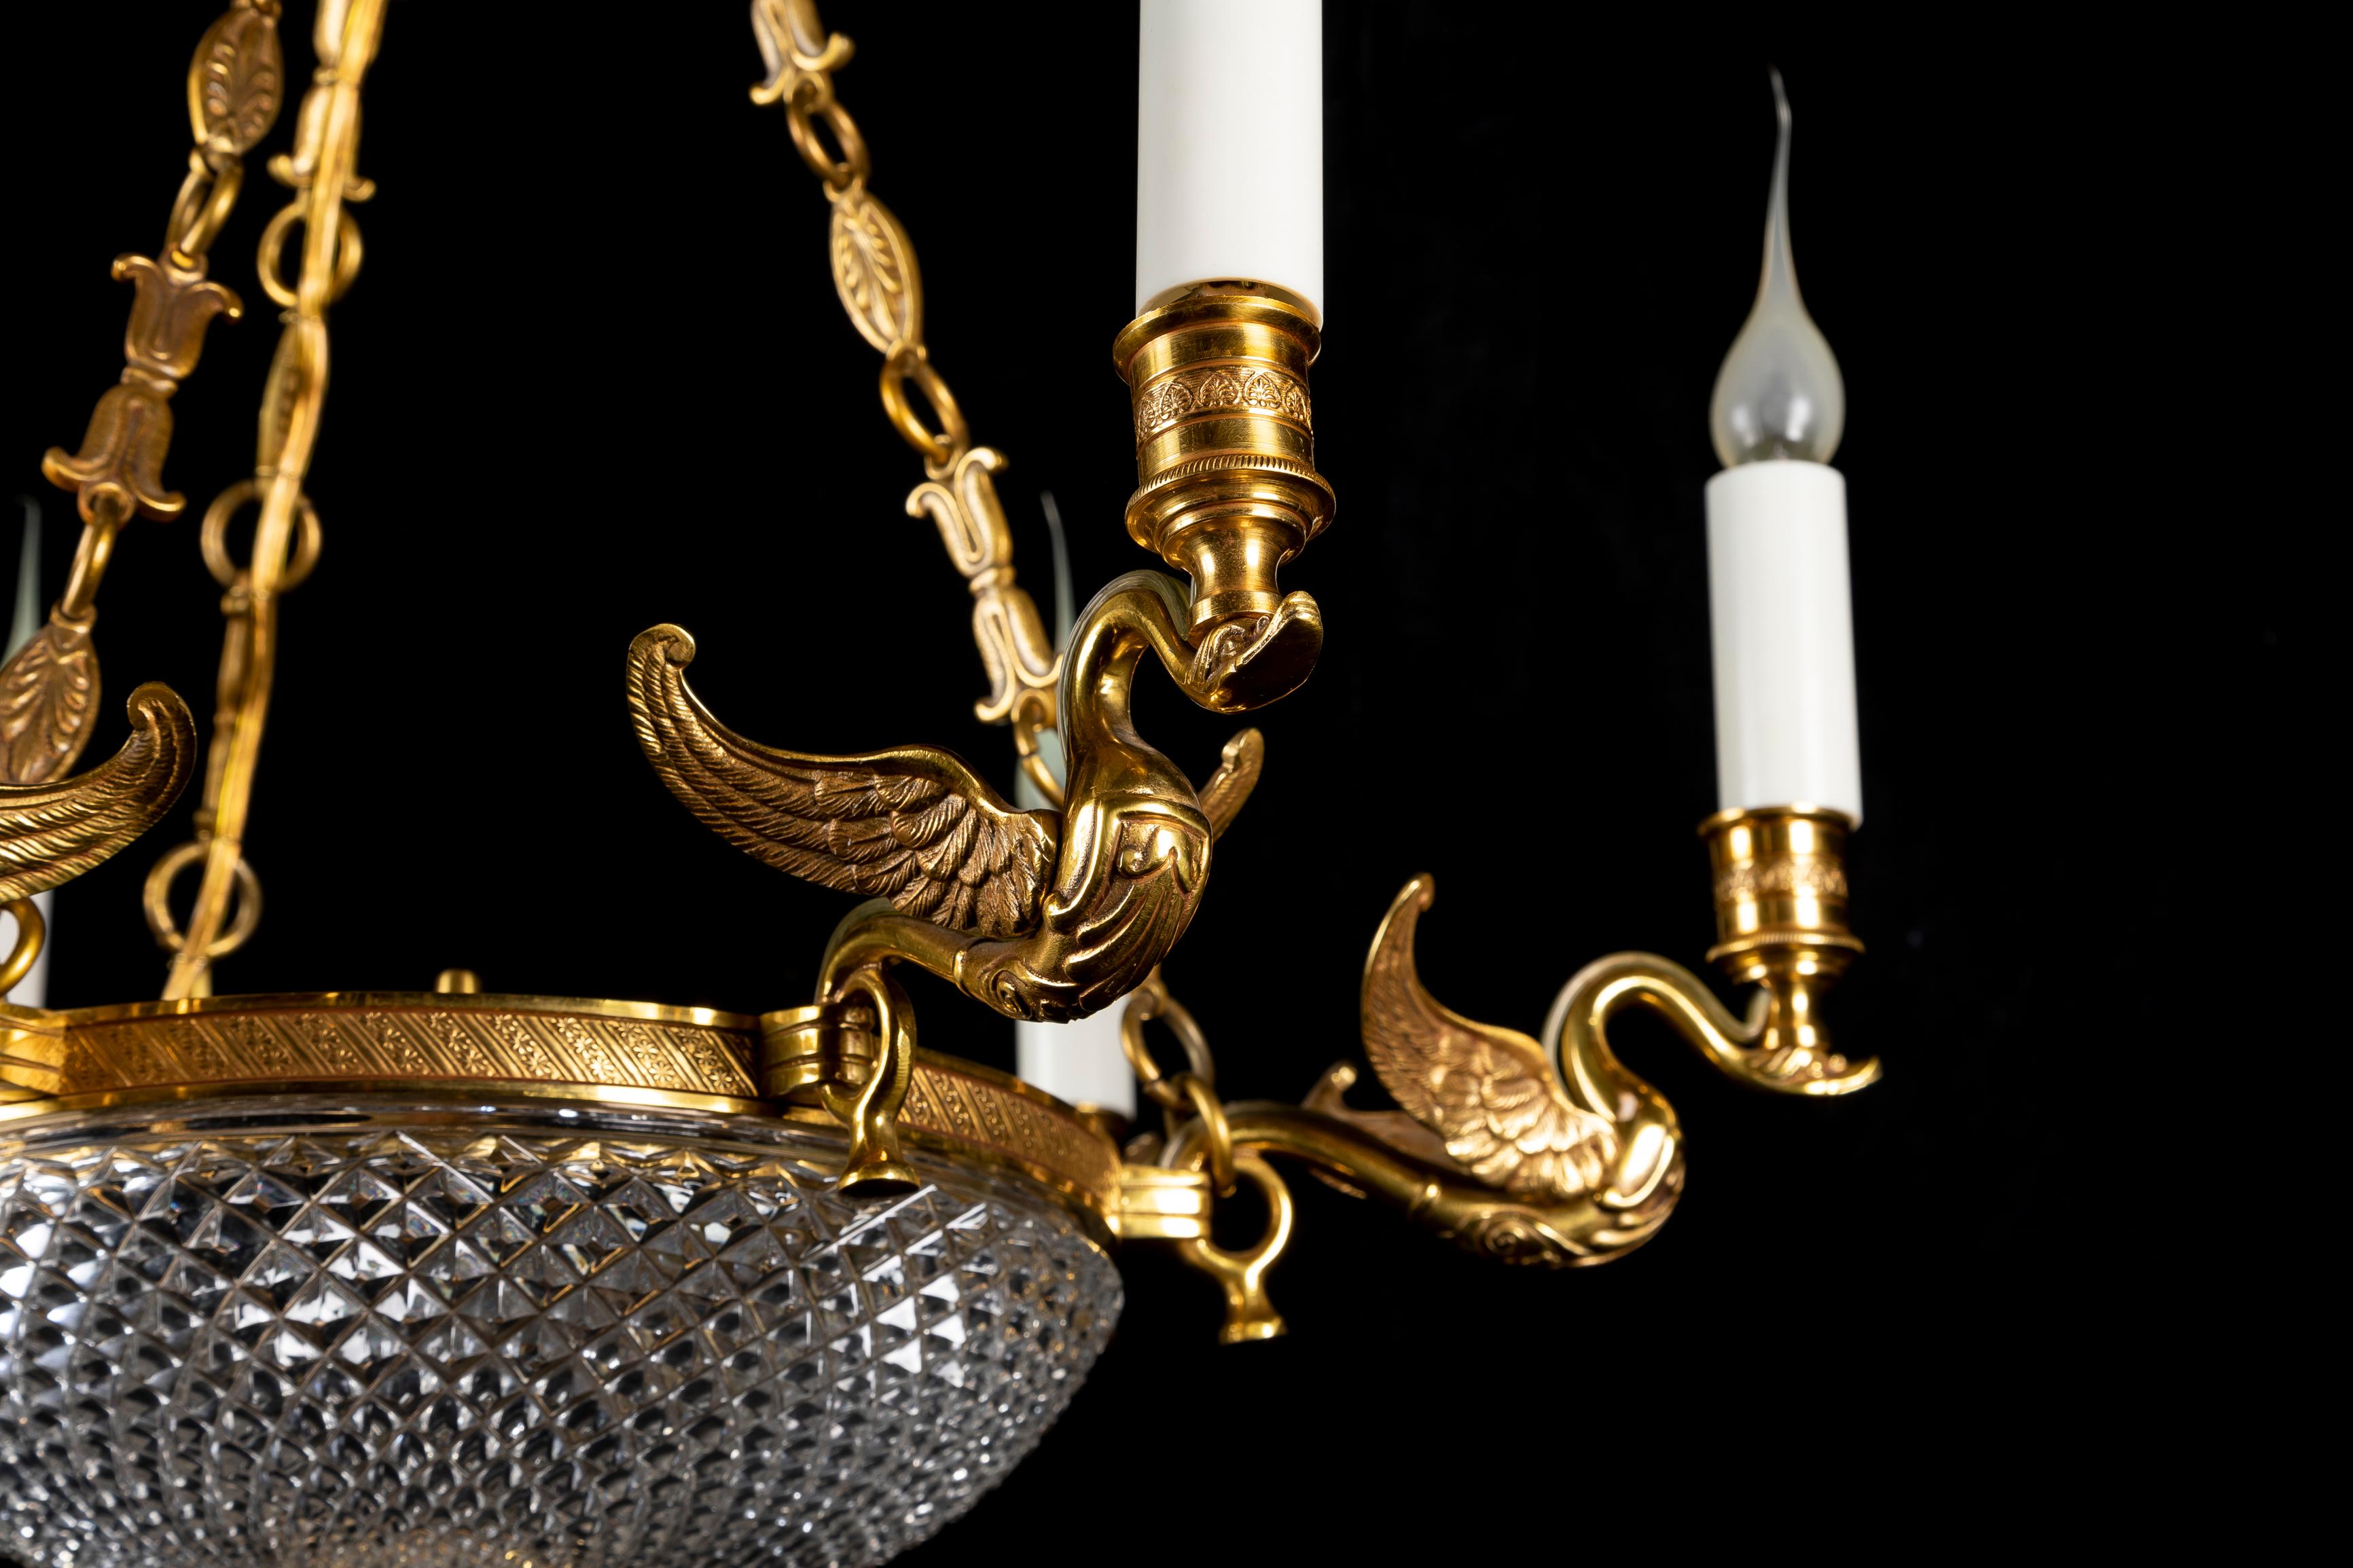 A Fine French Empire Style Gilt Bronze and Crystal Swan Chandelier For Sale 3